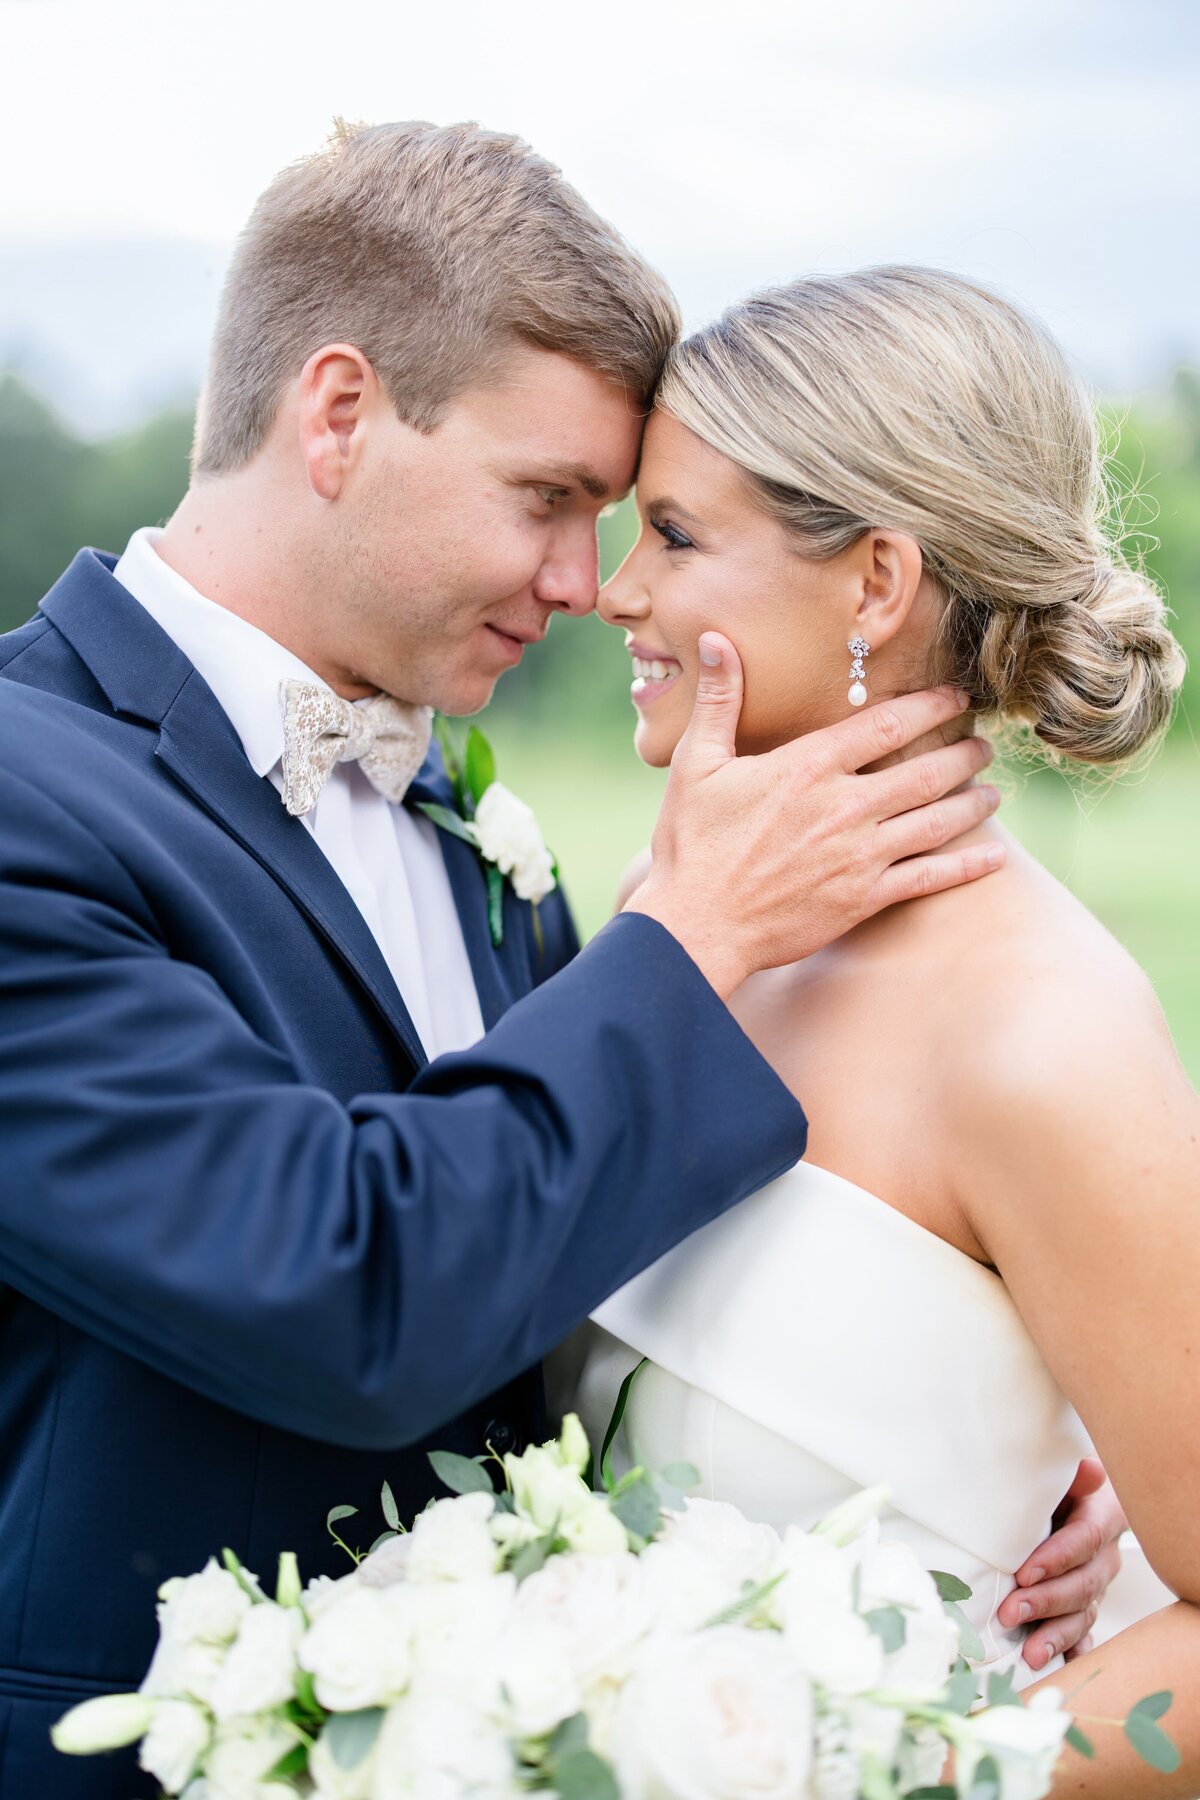 katie_and_alec_wedding_photography_wedding_videography_birmingham_alabama_husband_and_wife_team_photo_video_weddings_engagement_engagements_light_airy_focused_on_marriage__legacy_at_serenity_farms_wedding_45